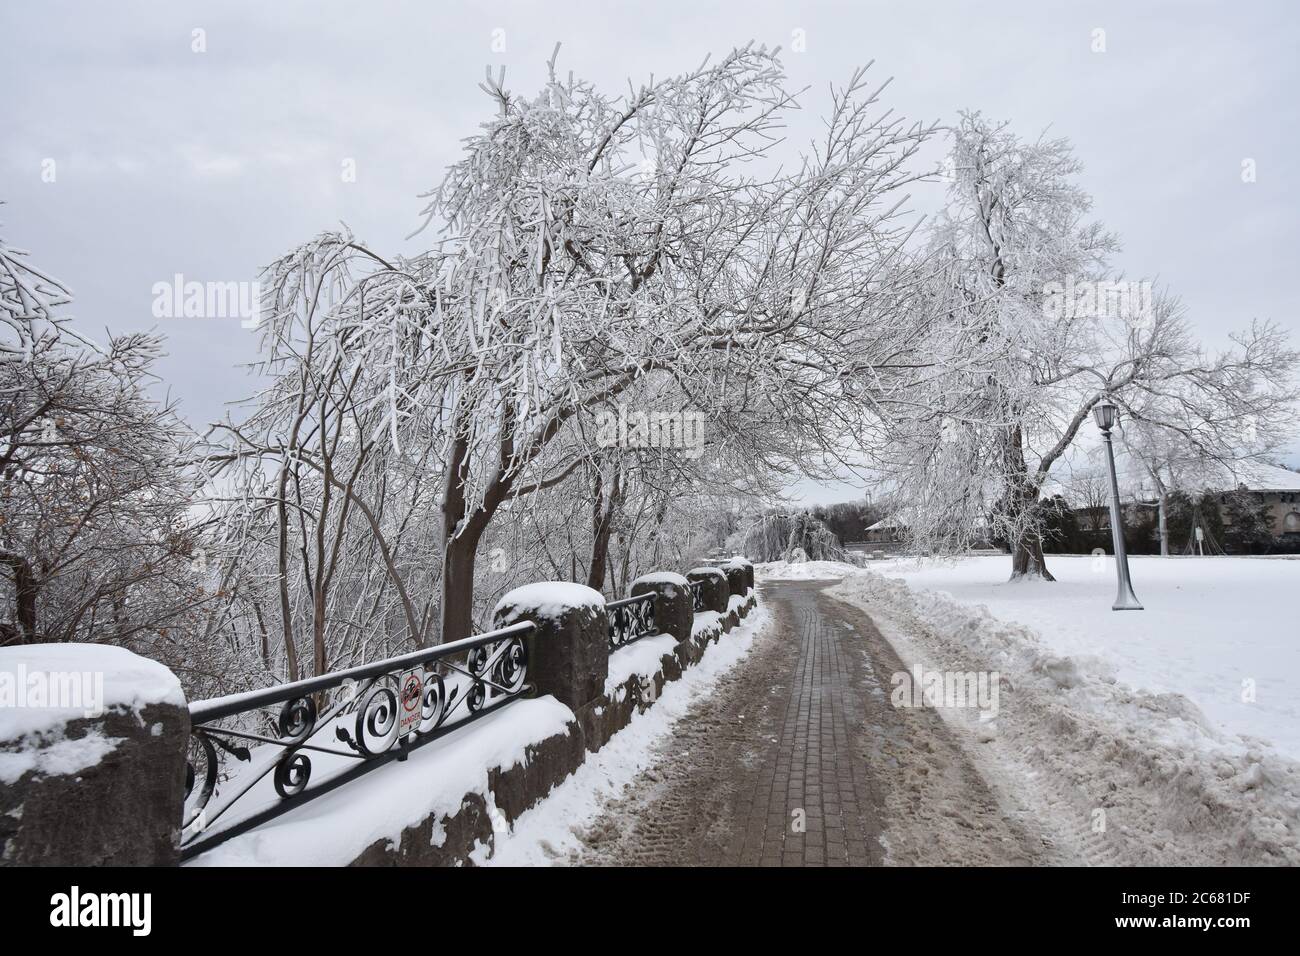 The riverside path in Queen Victoria Park during wintertime at Niagara Falls on the Canadian side. Trees have become white due to snow and ice. Stock Photo